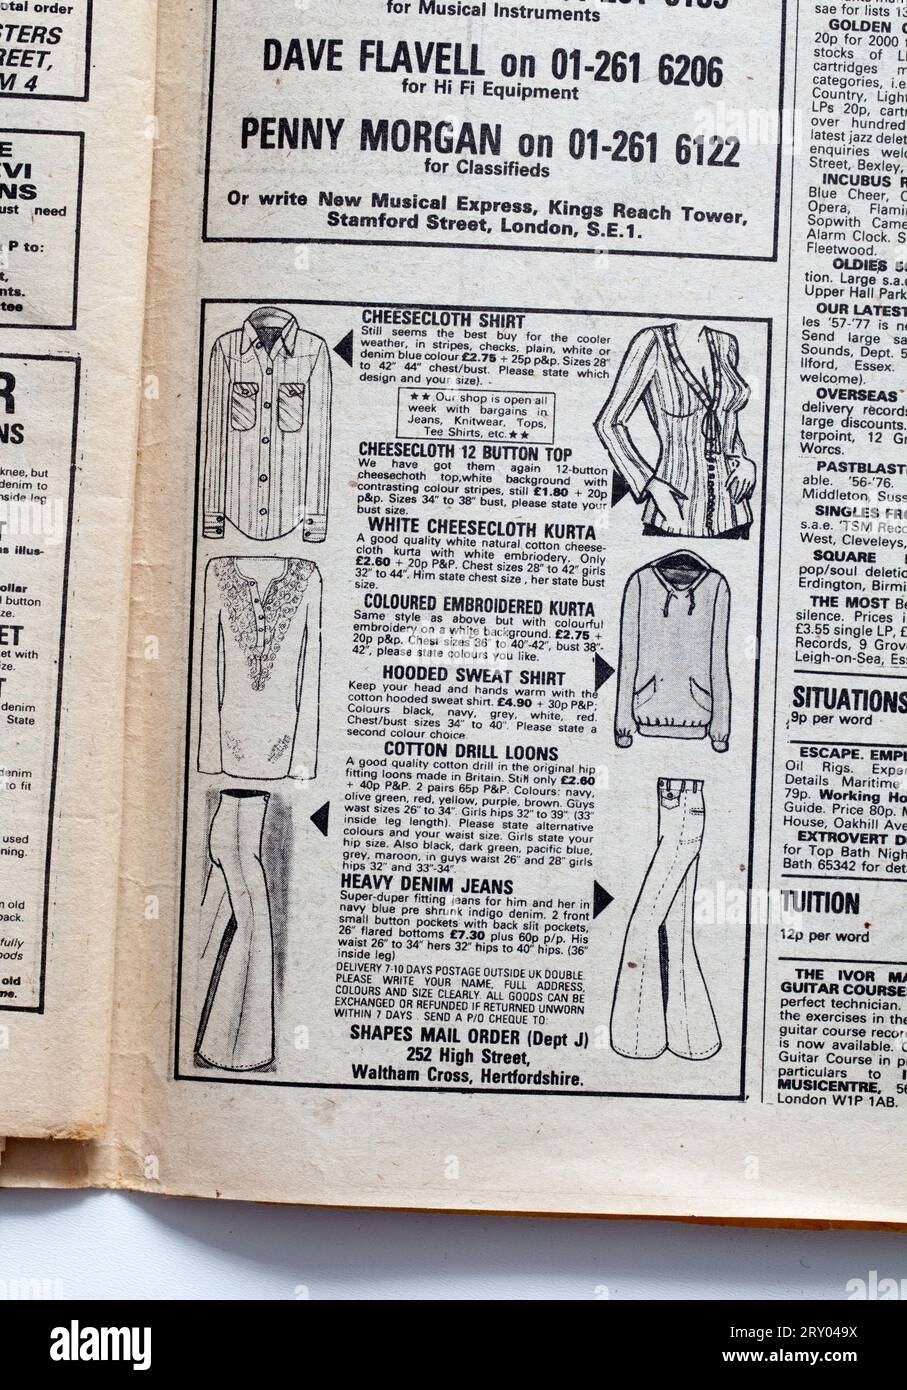 Advert for Clothing in 1970s issue of NME New Musical Express Music Paper Stock Photo